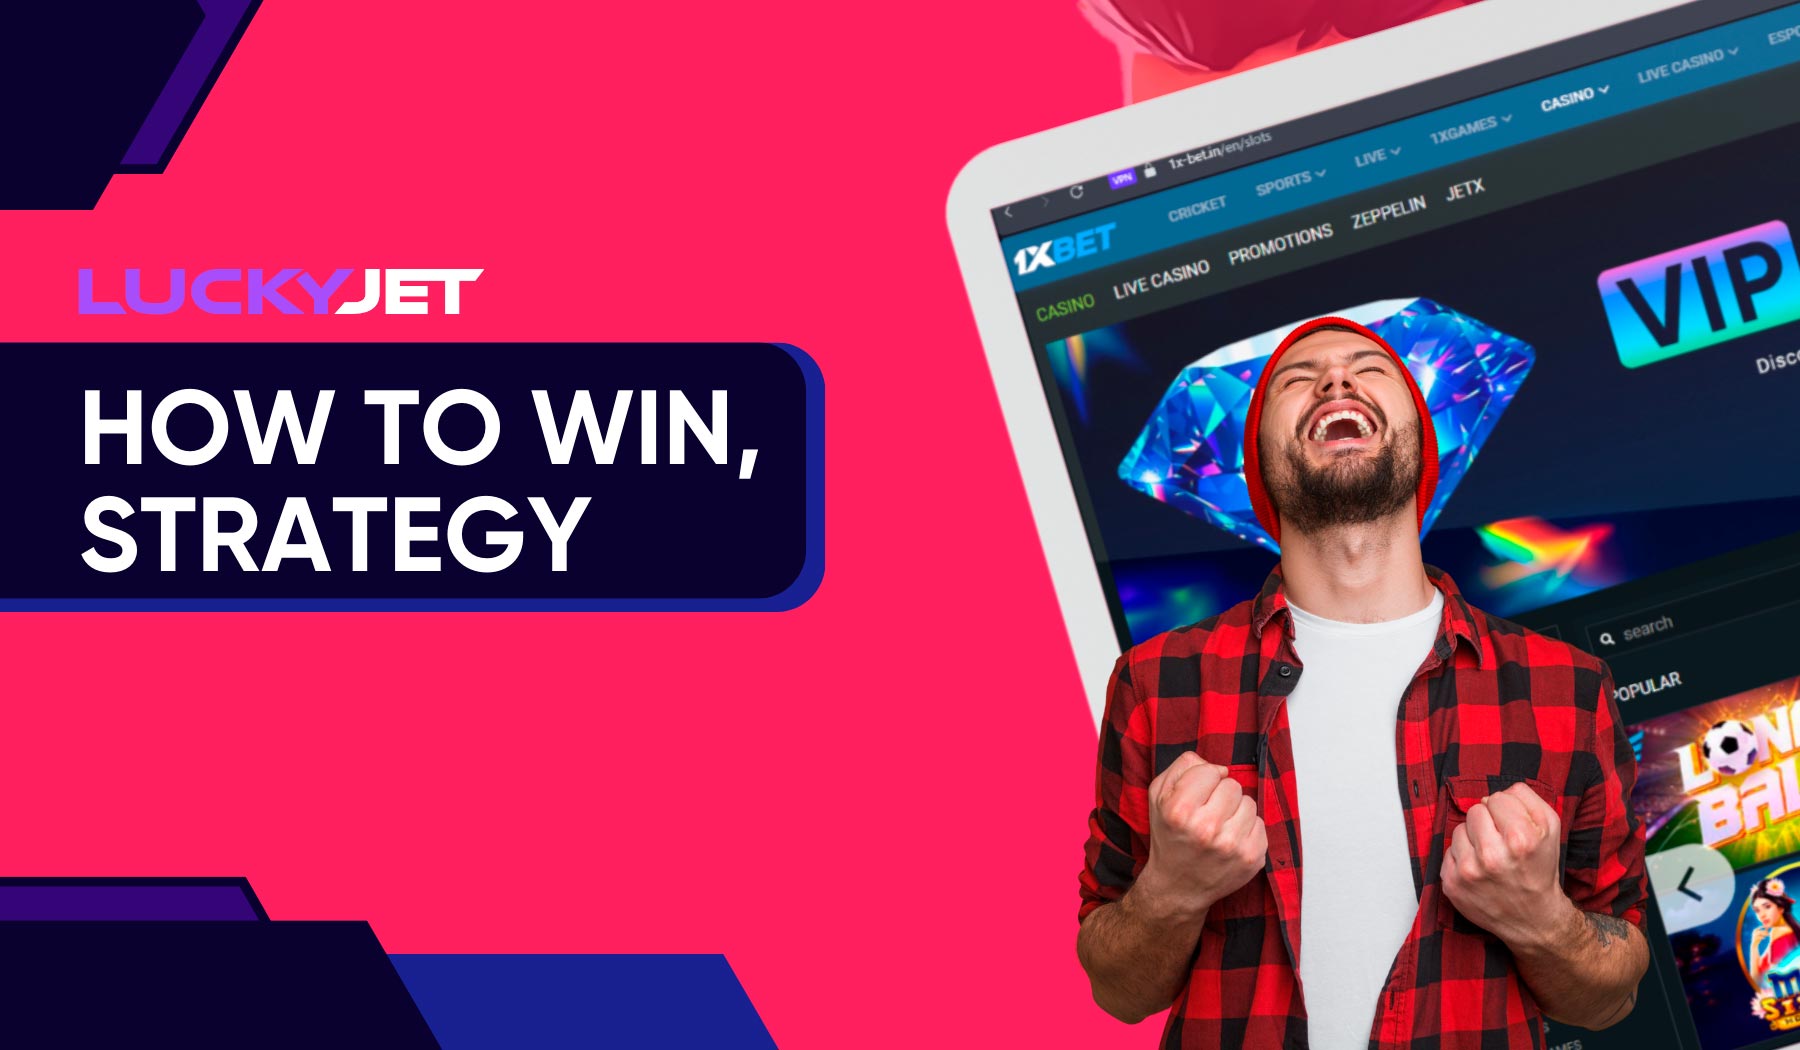 Applying strategies to win Lucky Jet on 1xbet